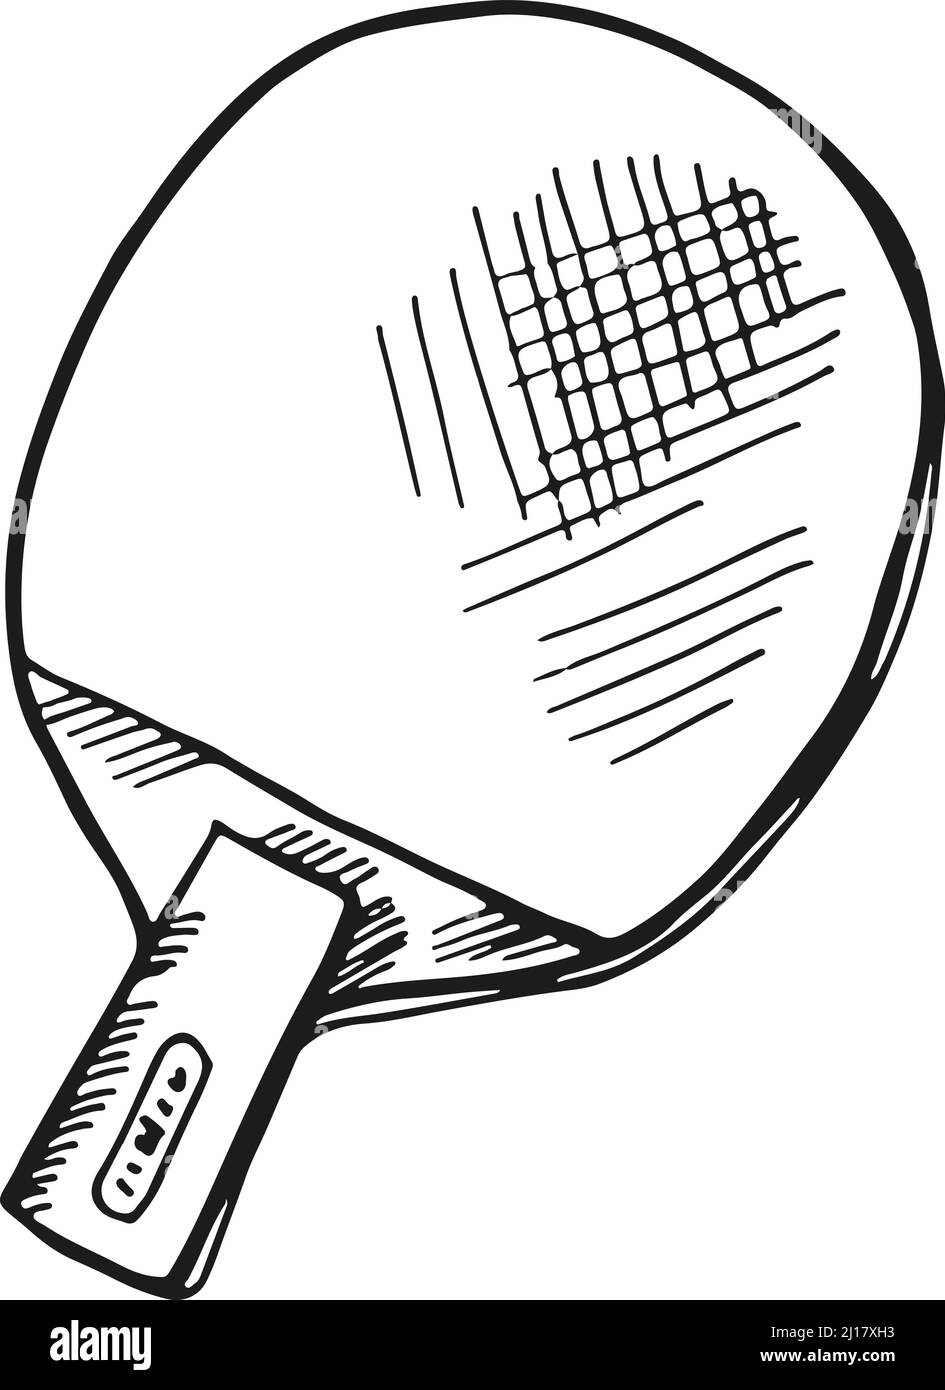 Ping pong racket doodle sketch. Table tennis paddle Stock Vector